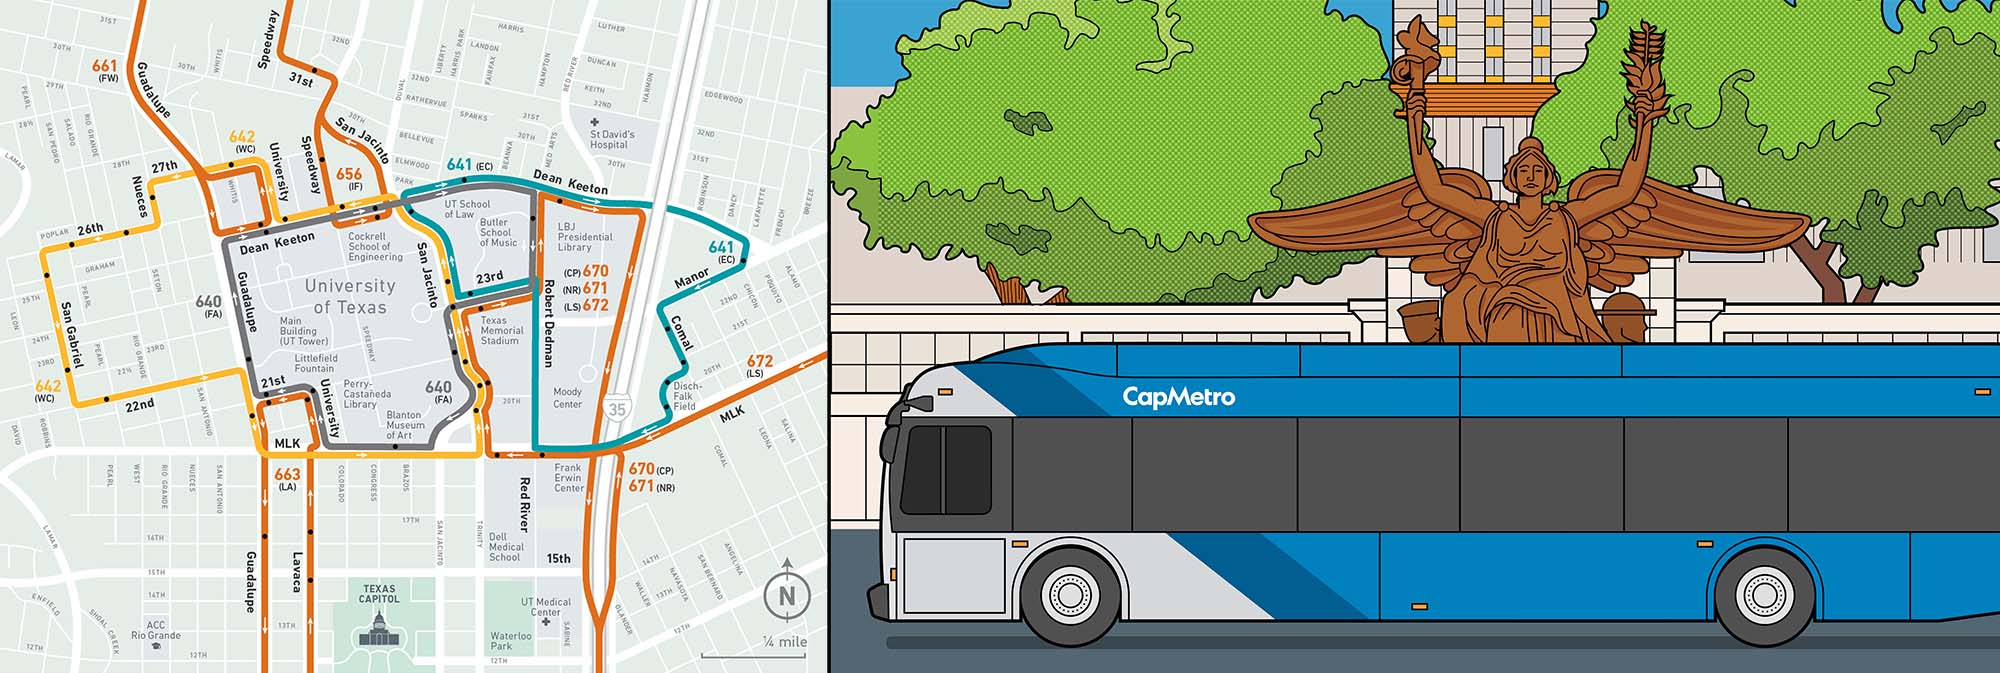 An illustration of Littlefield Fountain and a Map of UT Shuttle Routes